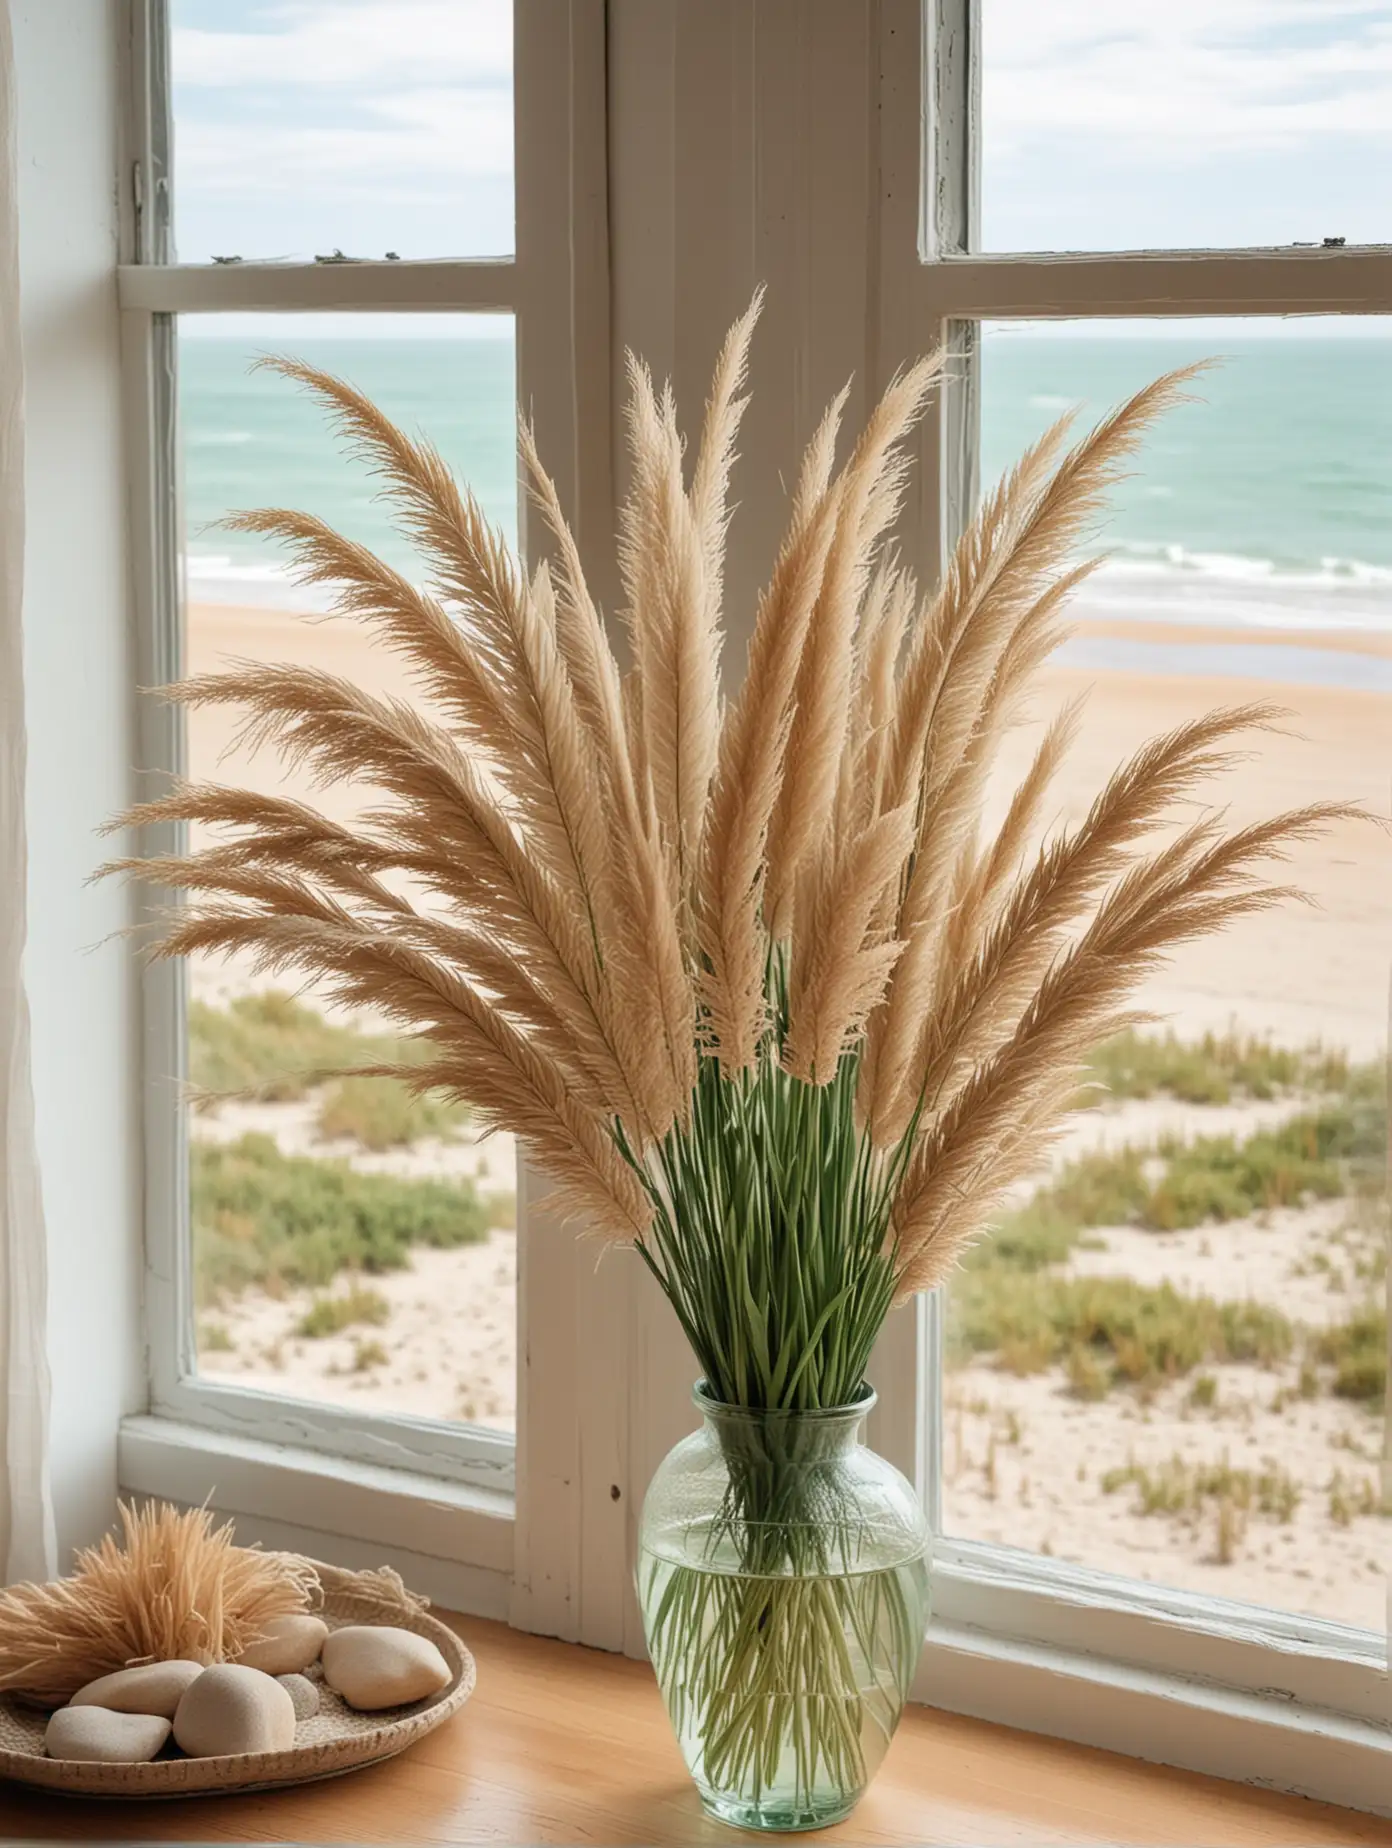 Vase of Pampas Grass by Beach View Window